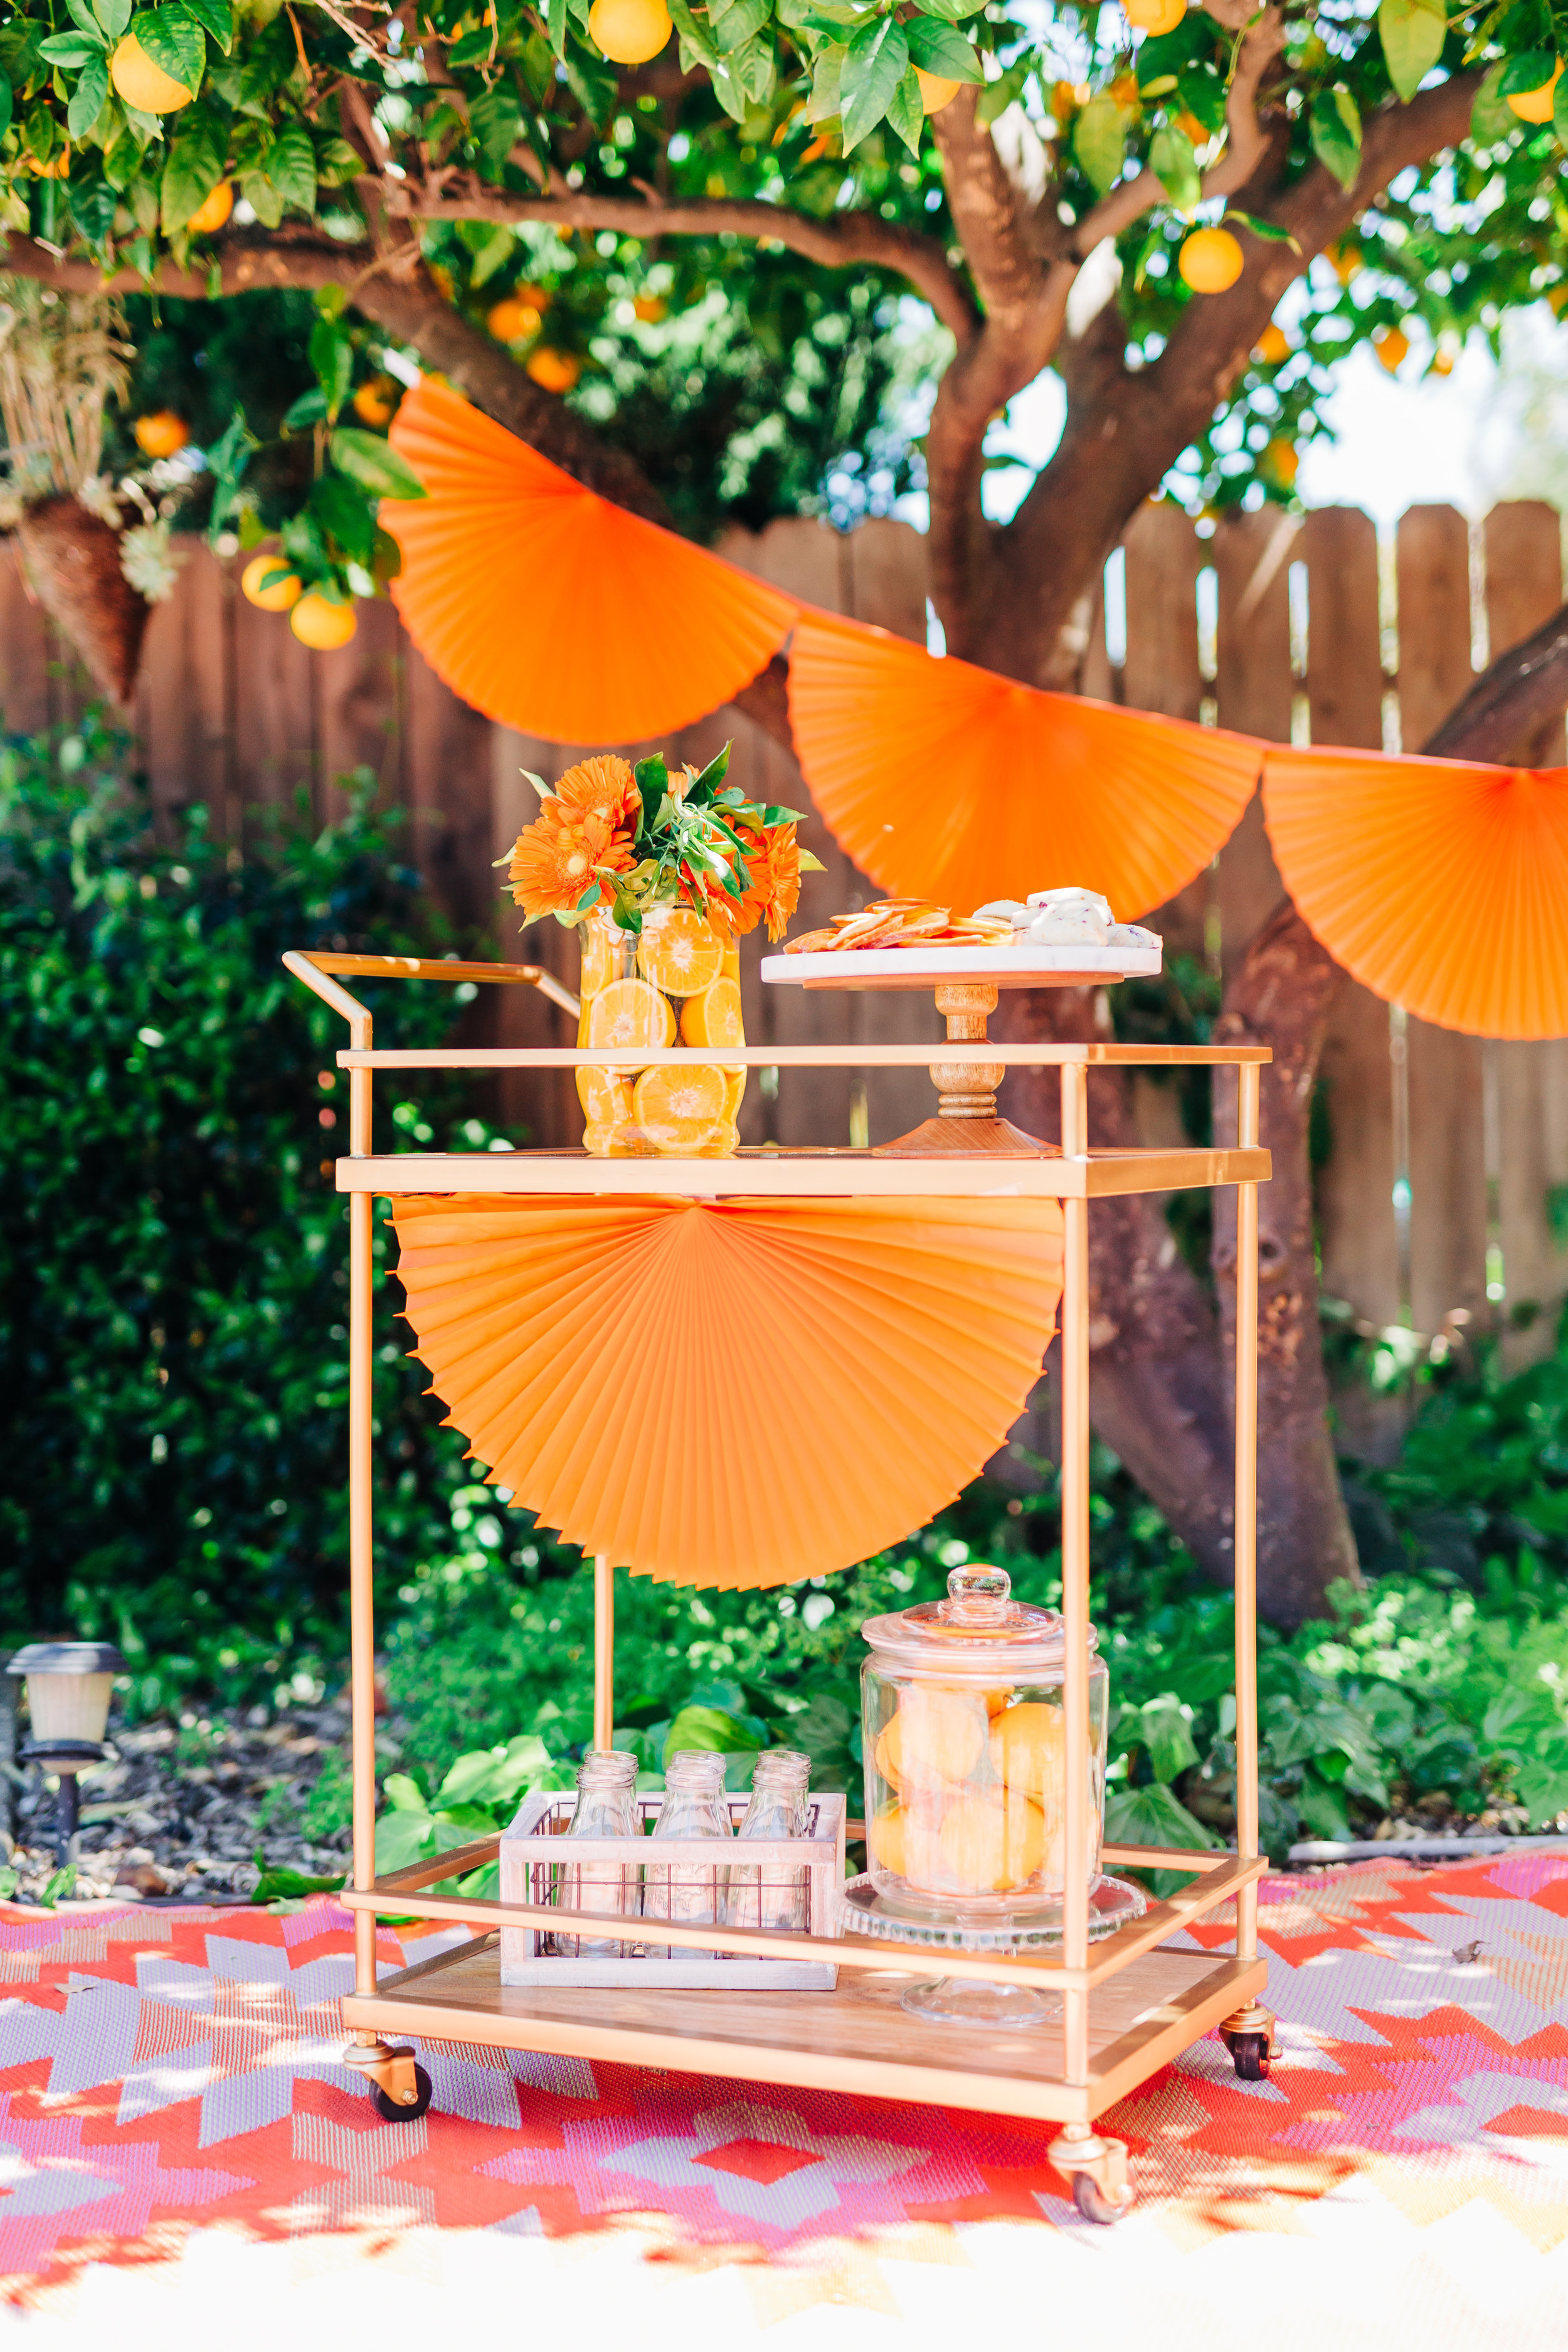 Bar cart decorations for orange picking party. Candied oranges and orange scones4.jpg